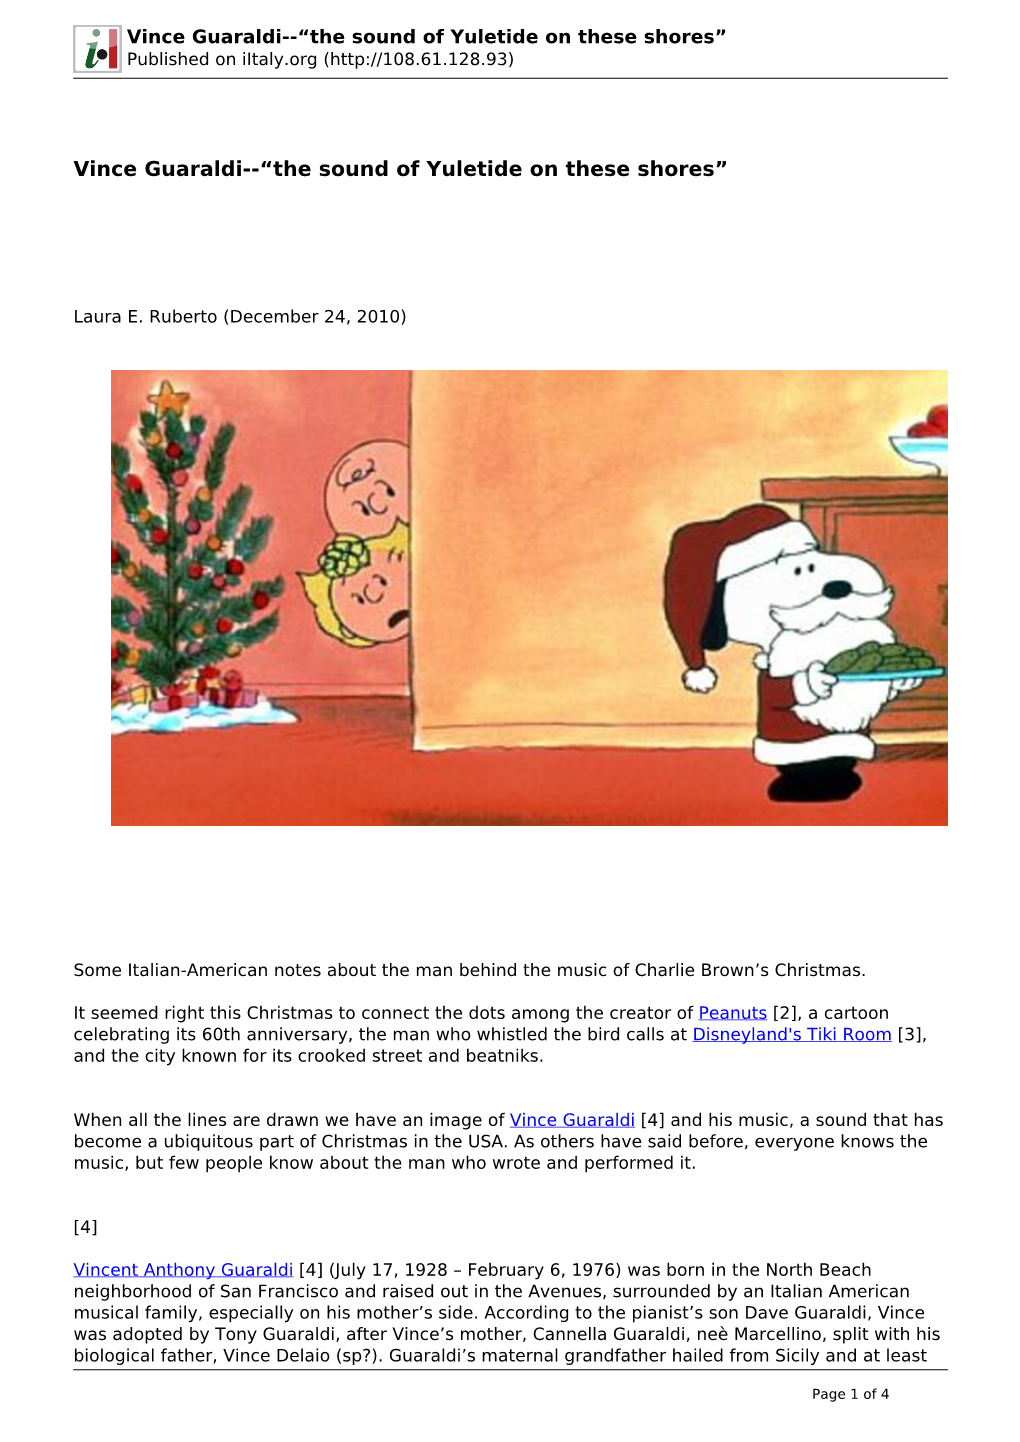 Vince Guaraldi--“The Sound of Yuletide on These Shores” Published on Iitaly.Org (